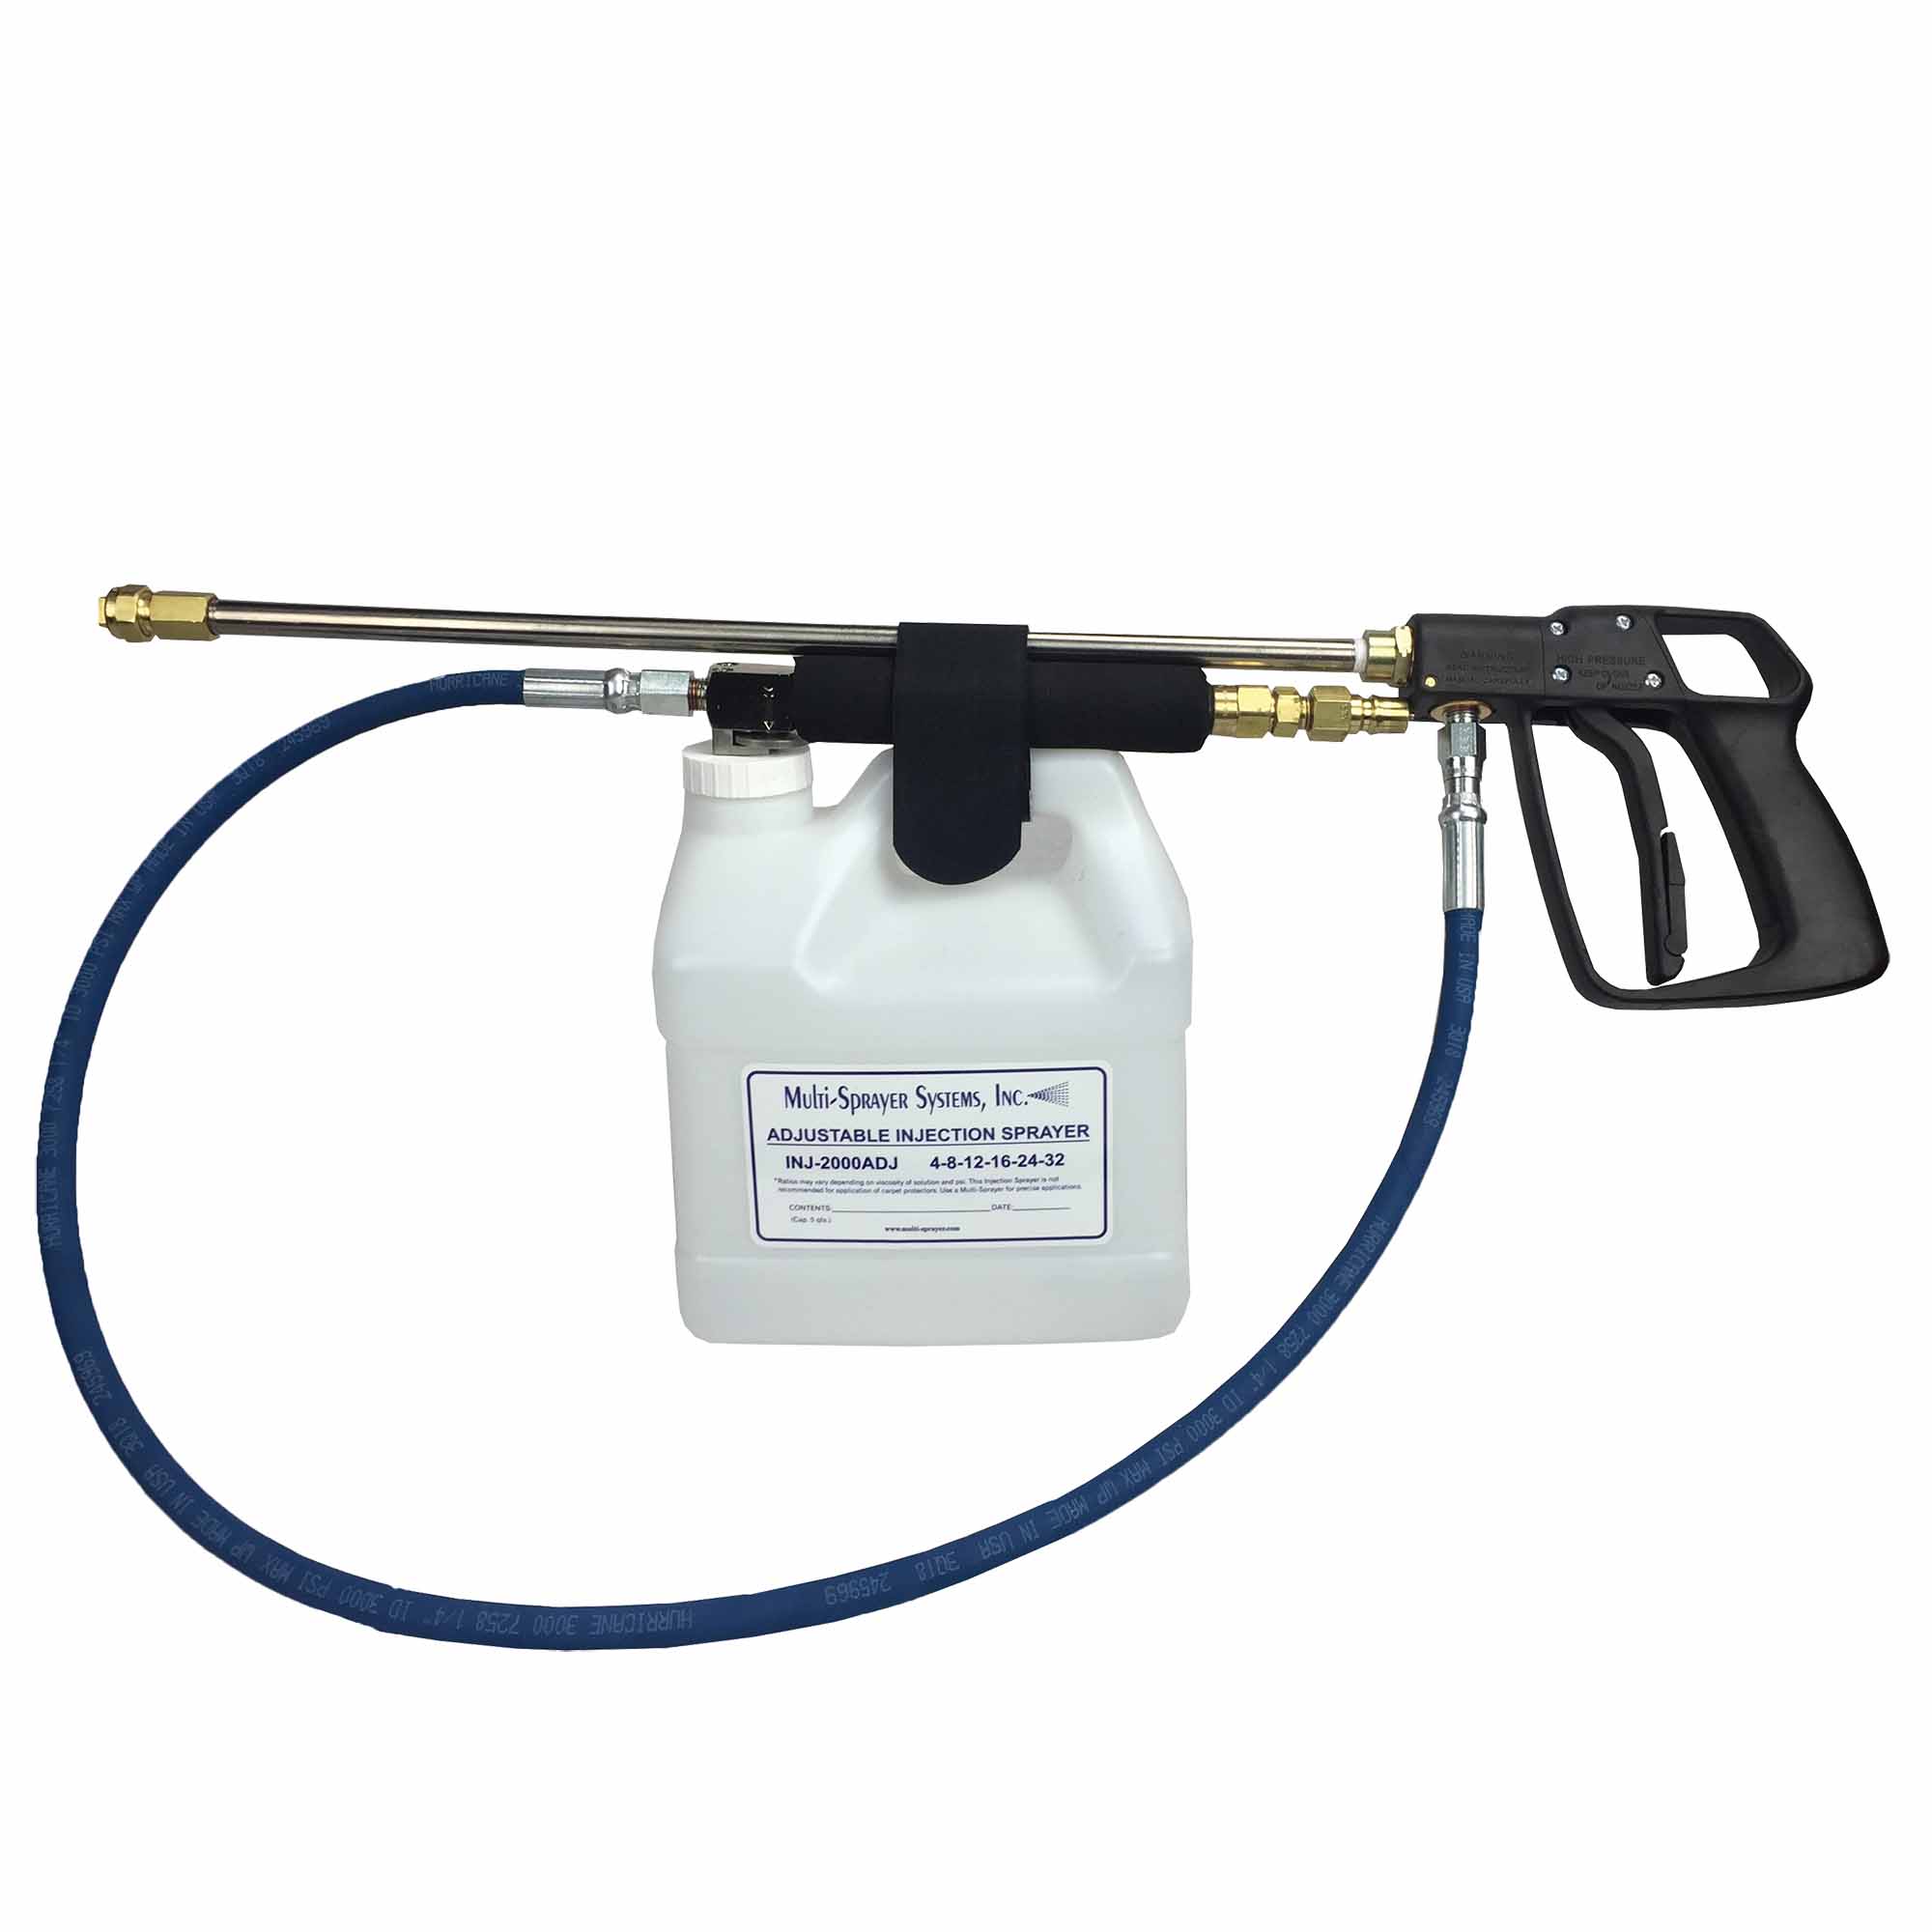 Carpet Cleaning INLINE Injection SPRAYER Set of 2 